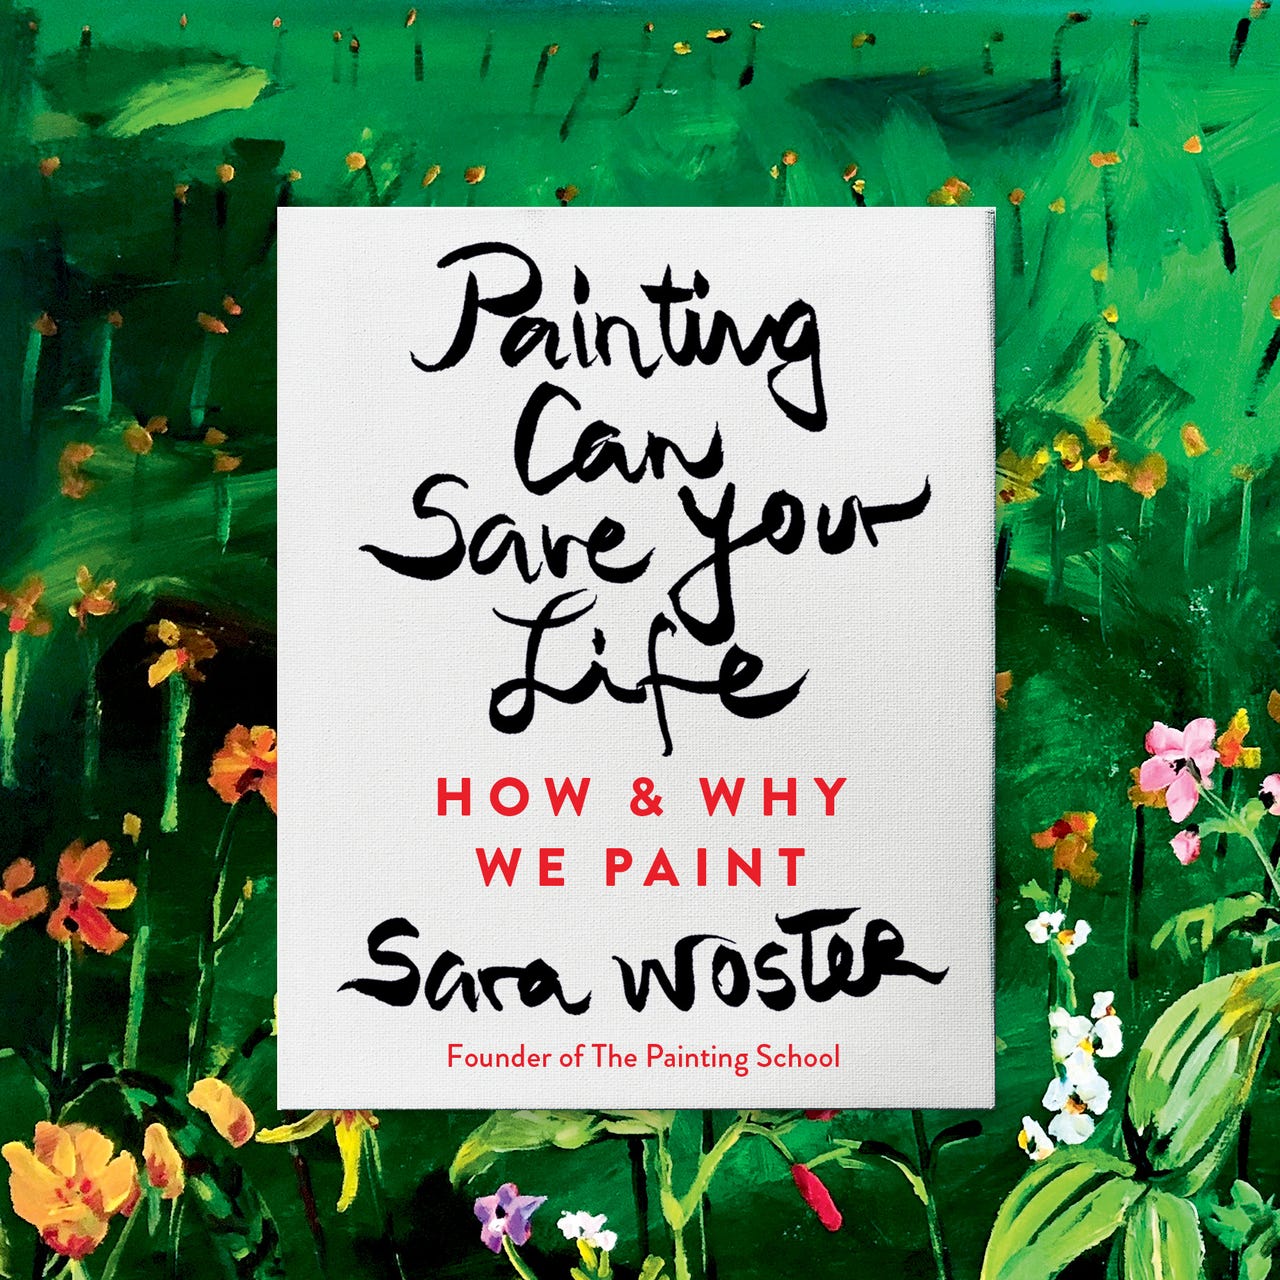 Artwork for "Painting Can Save Your Life" 